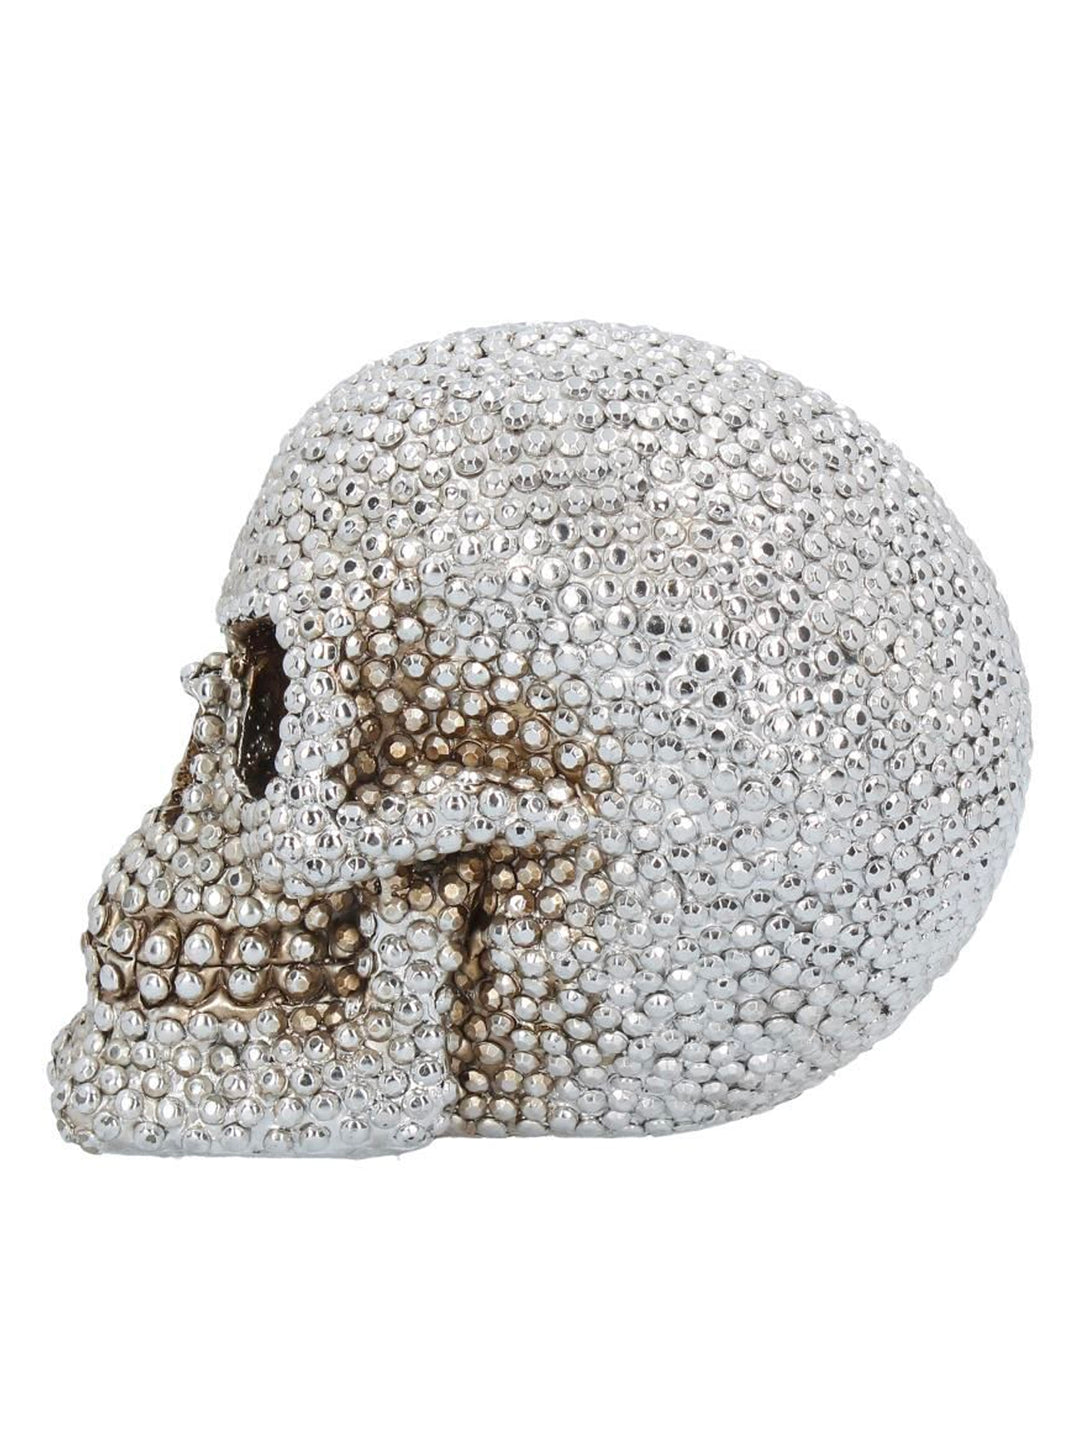 Priceless Grin Silver Skull, Silver jewels and stone covered skull